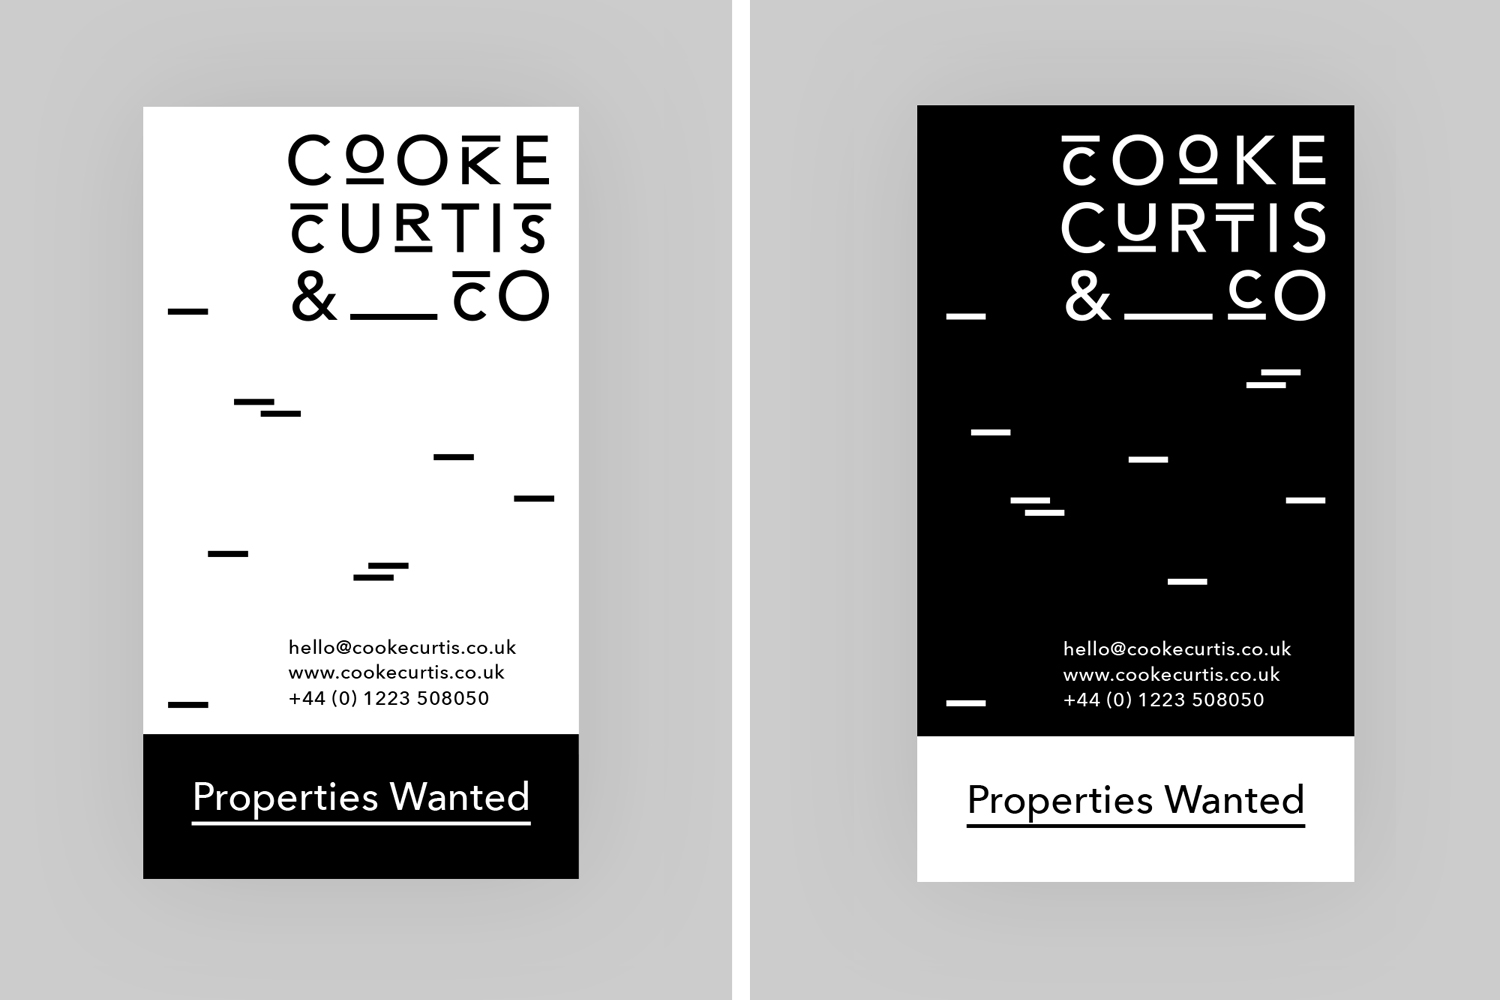 Brand identity and signage for UK estate agent Cooke Curtis & Co. by graphic design studio The District, United Kingdom